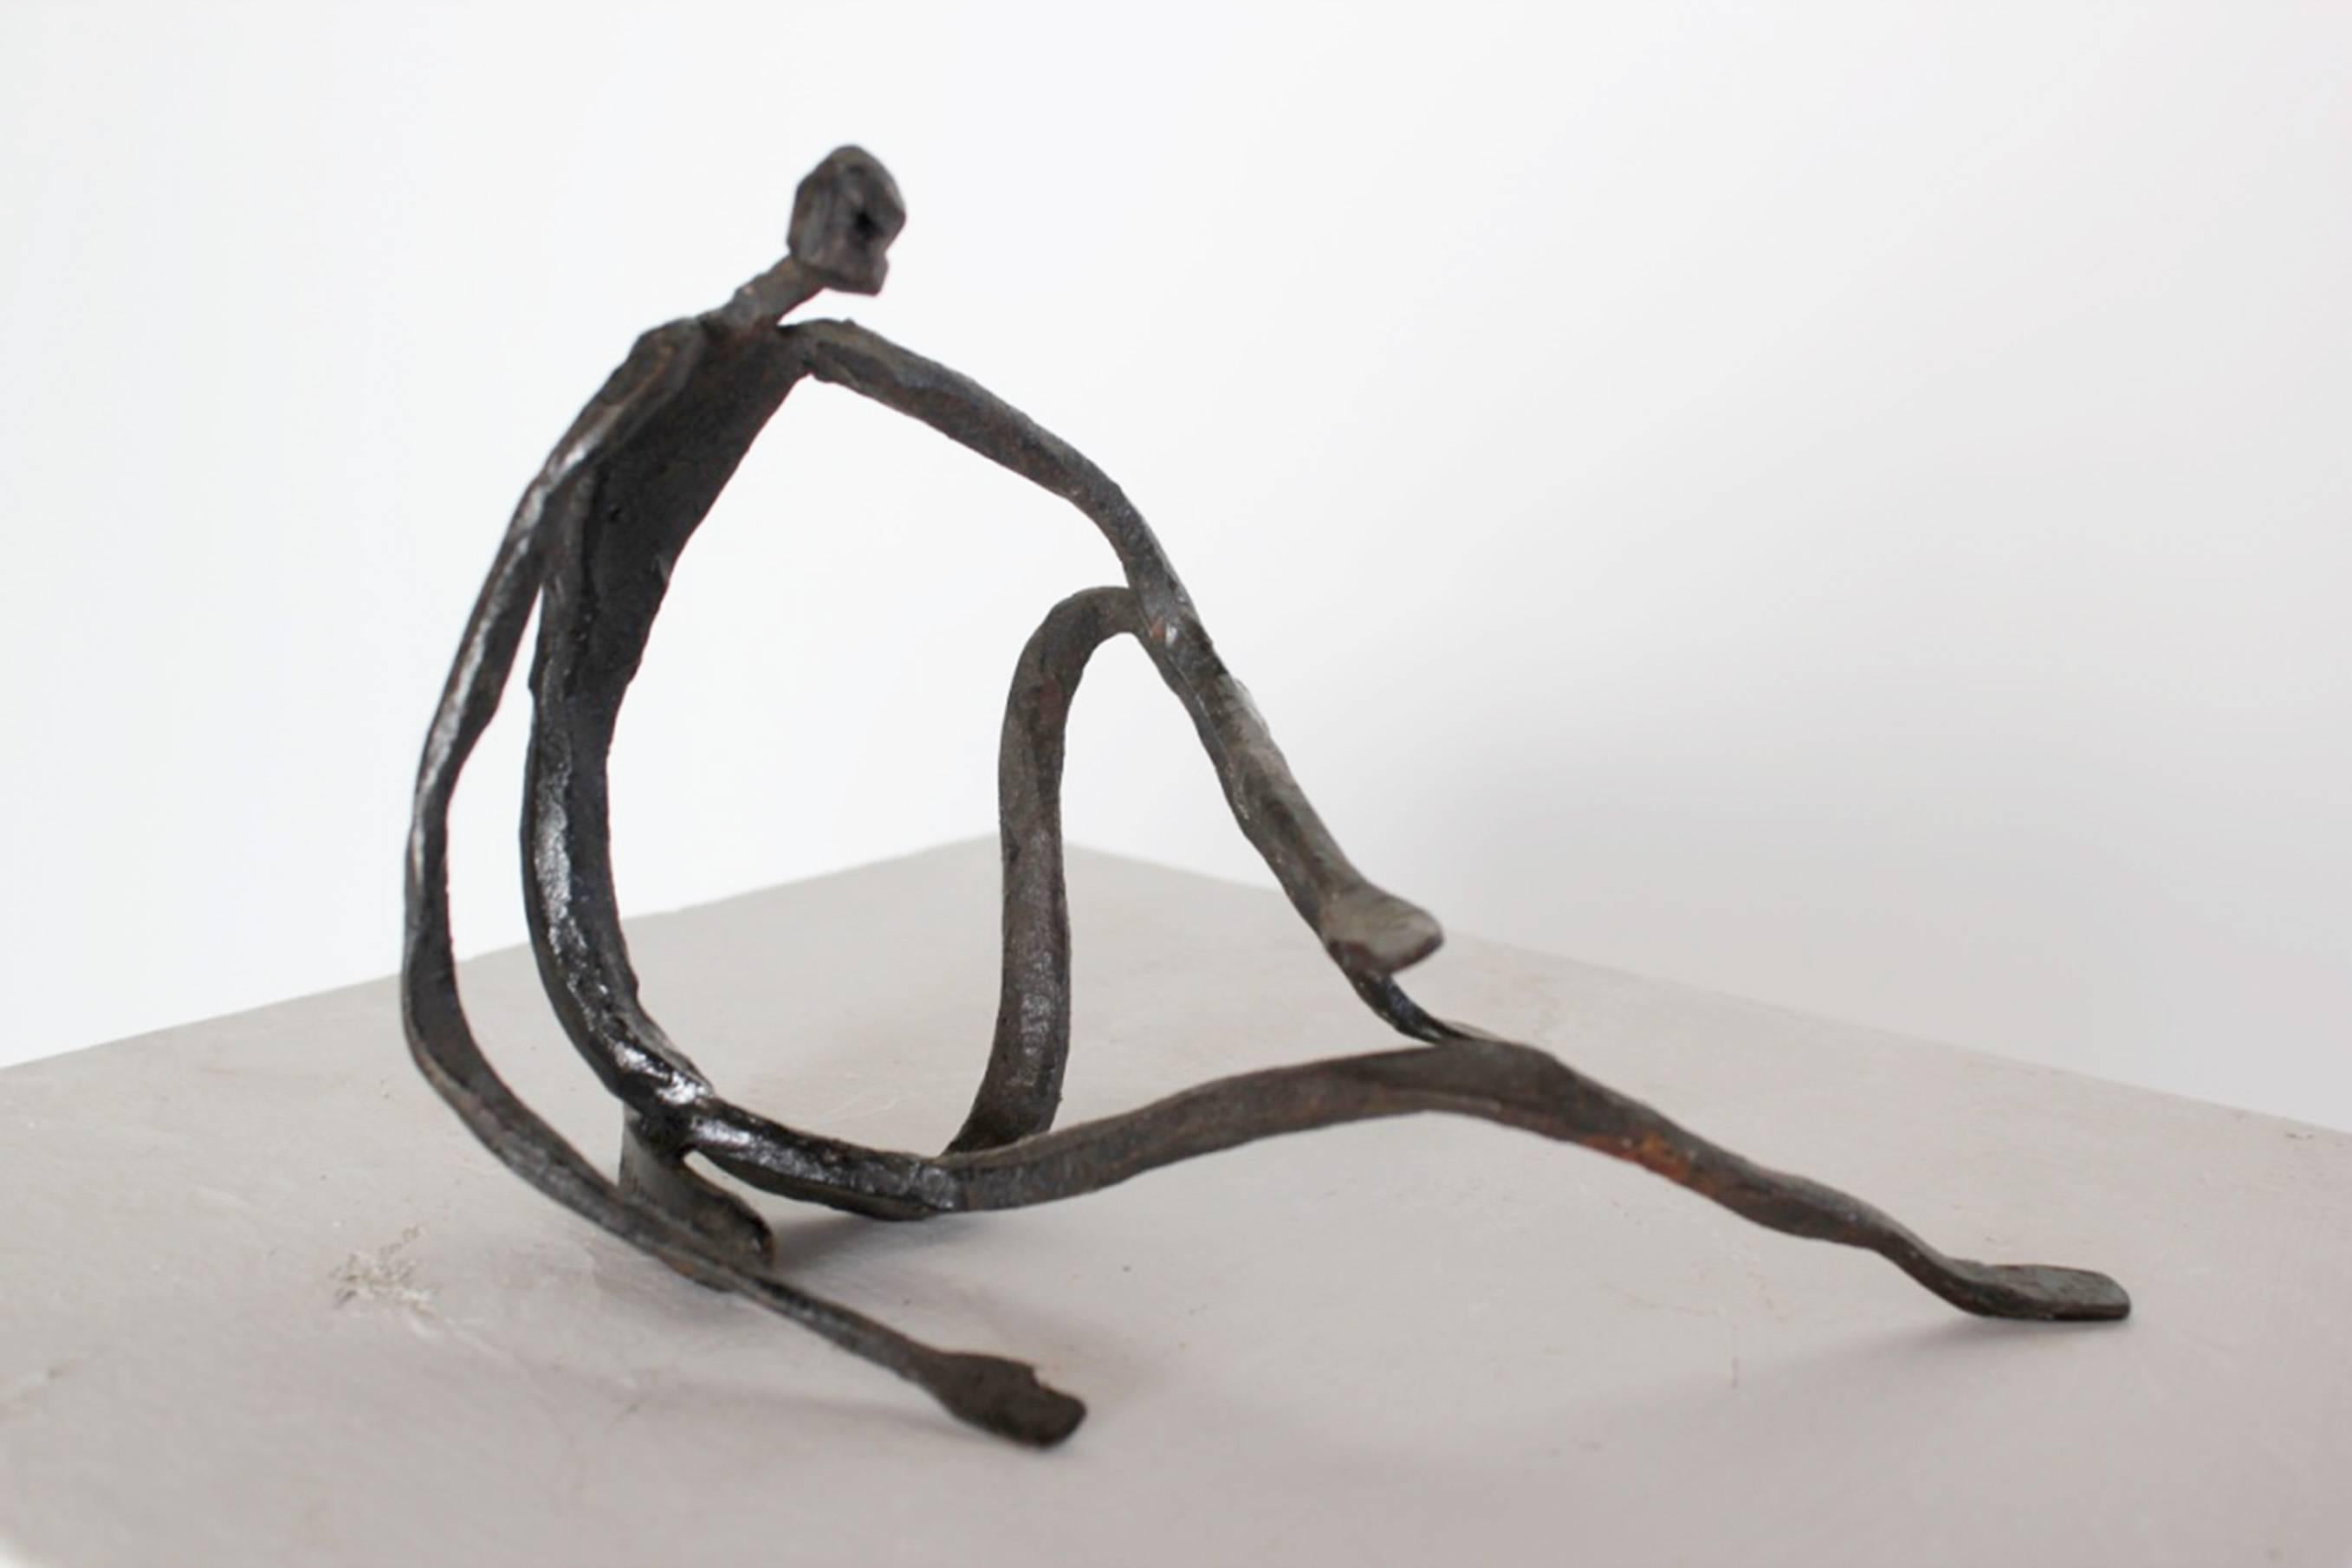 Modern Figurative Sculpture in Hand-Forged Textured Wrought Iron In Excellent Condition For Sale In London, GB